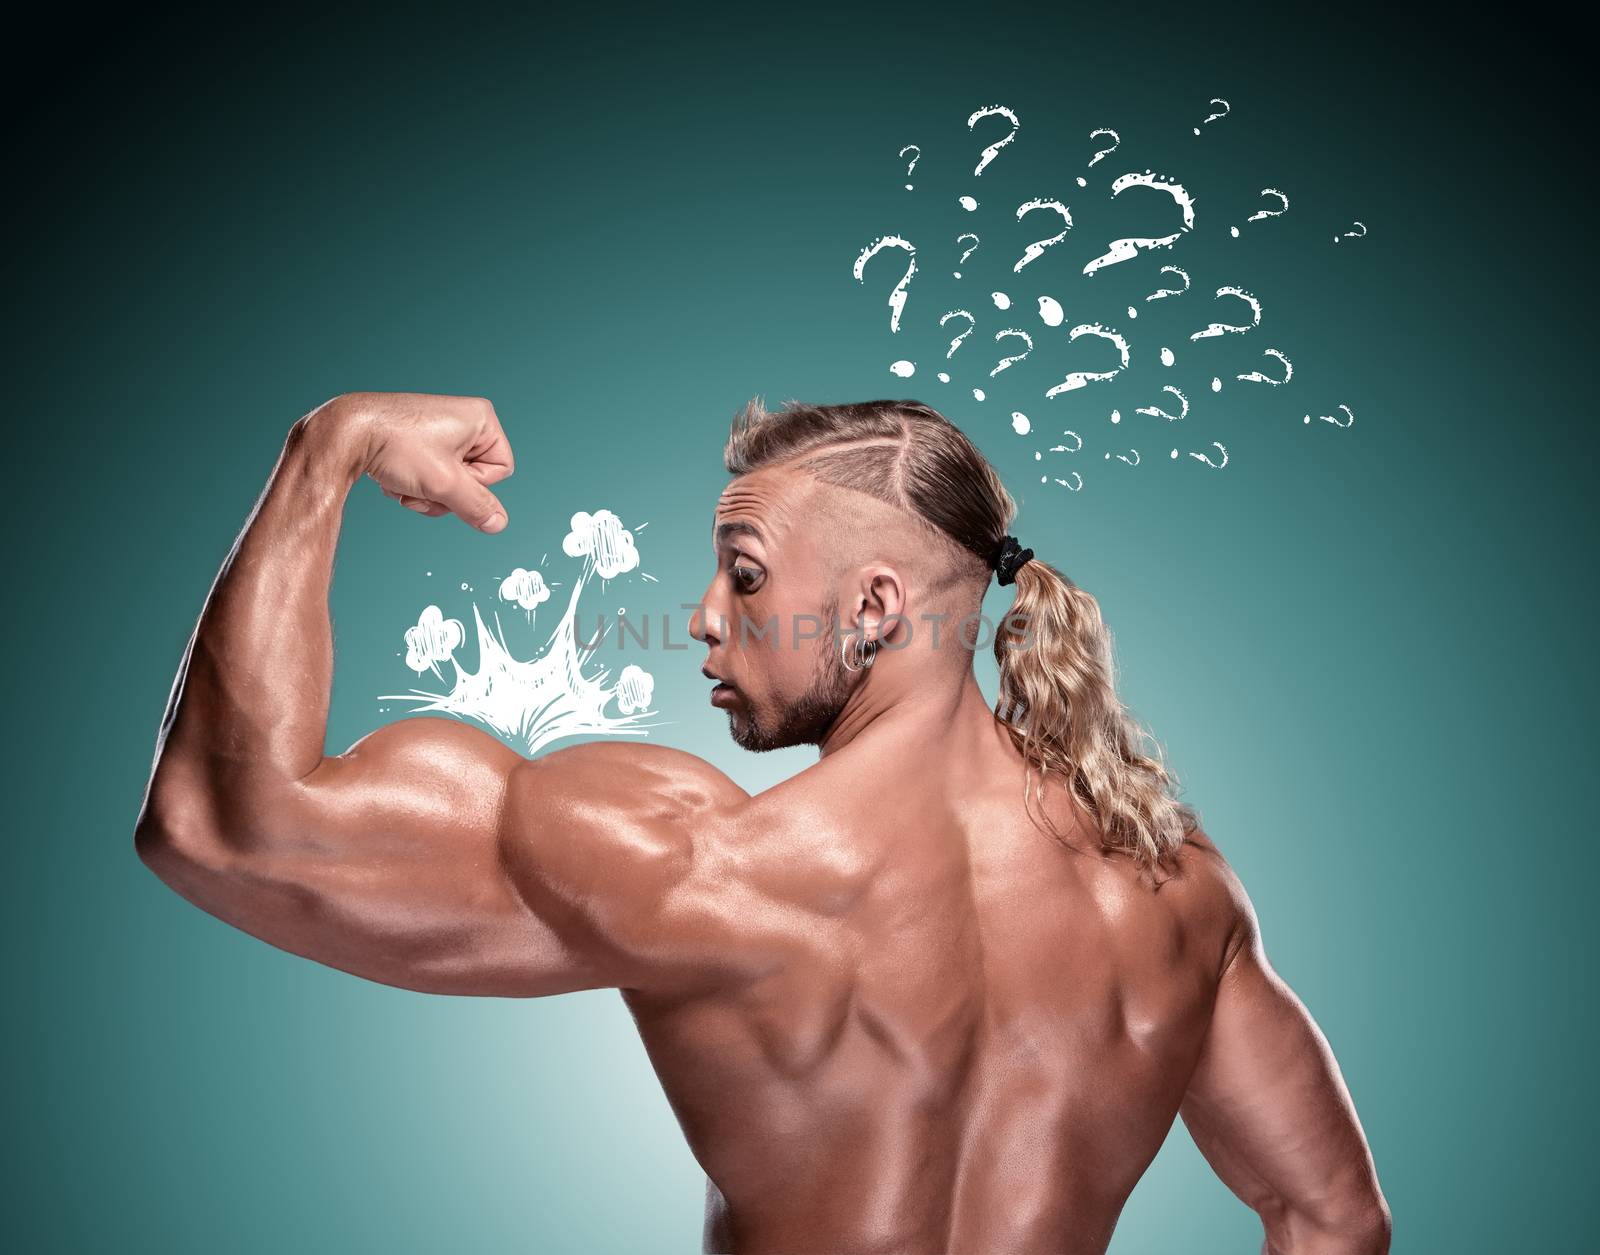 Attractive male body builde on blue background. Concept of admiration, surprise, question